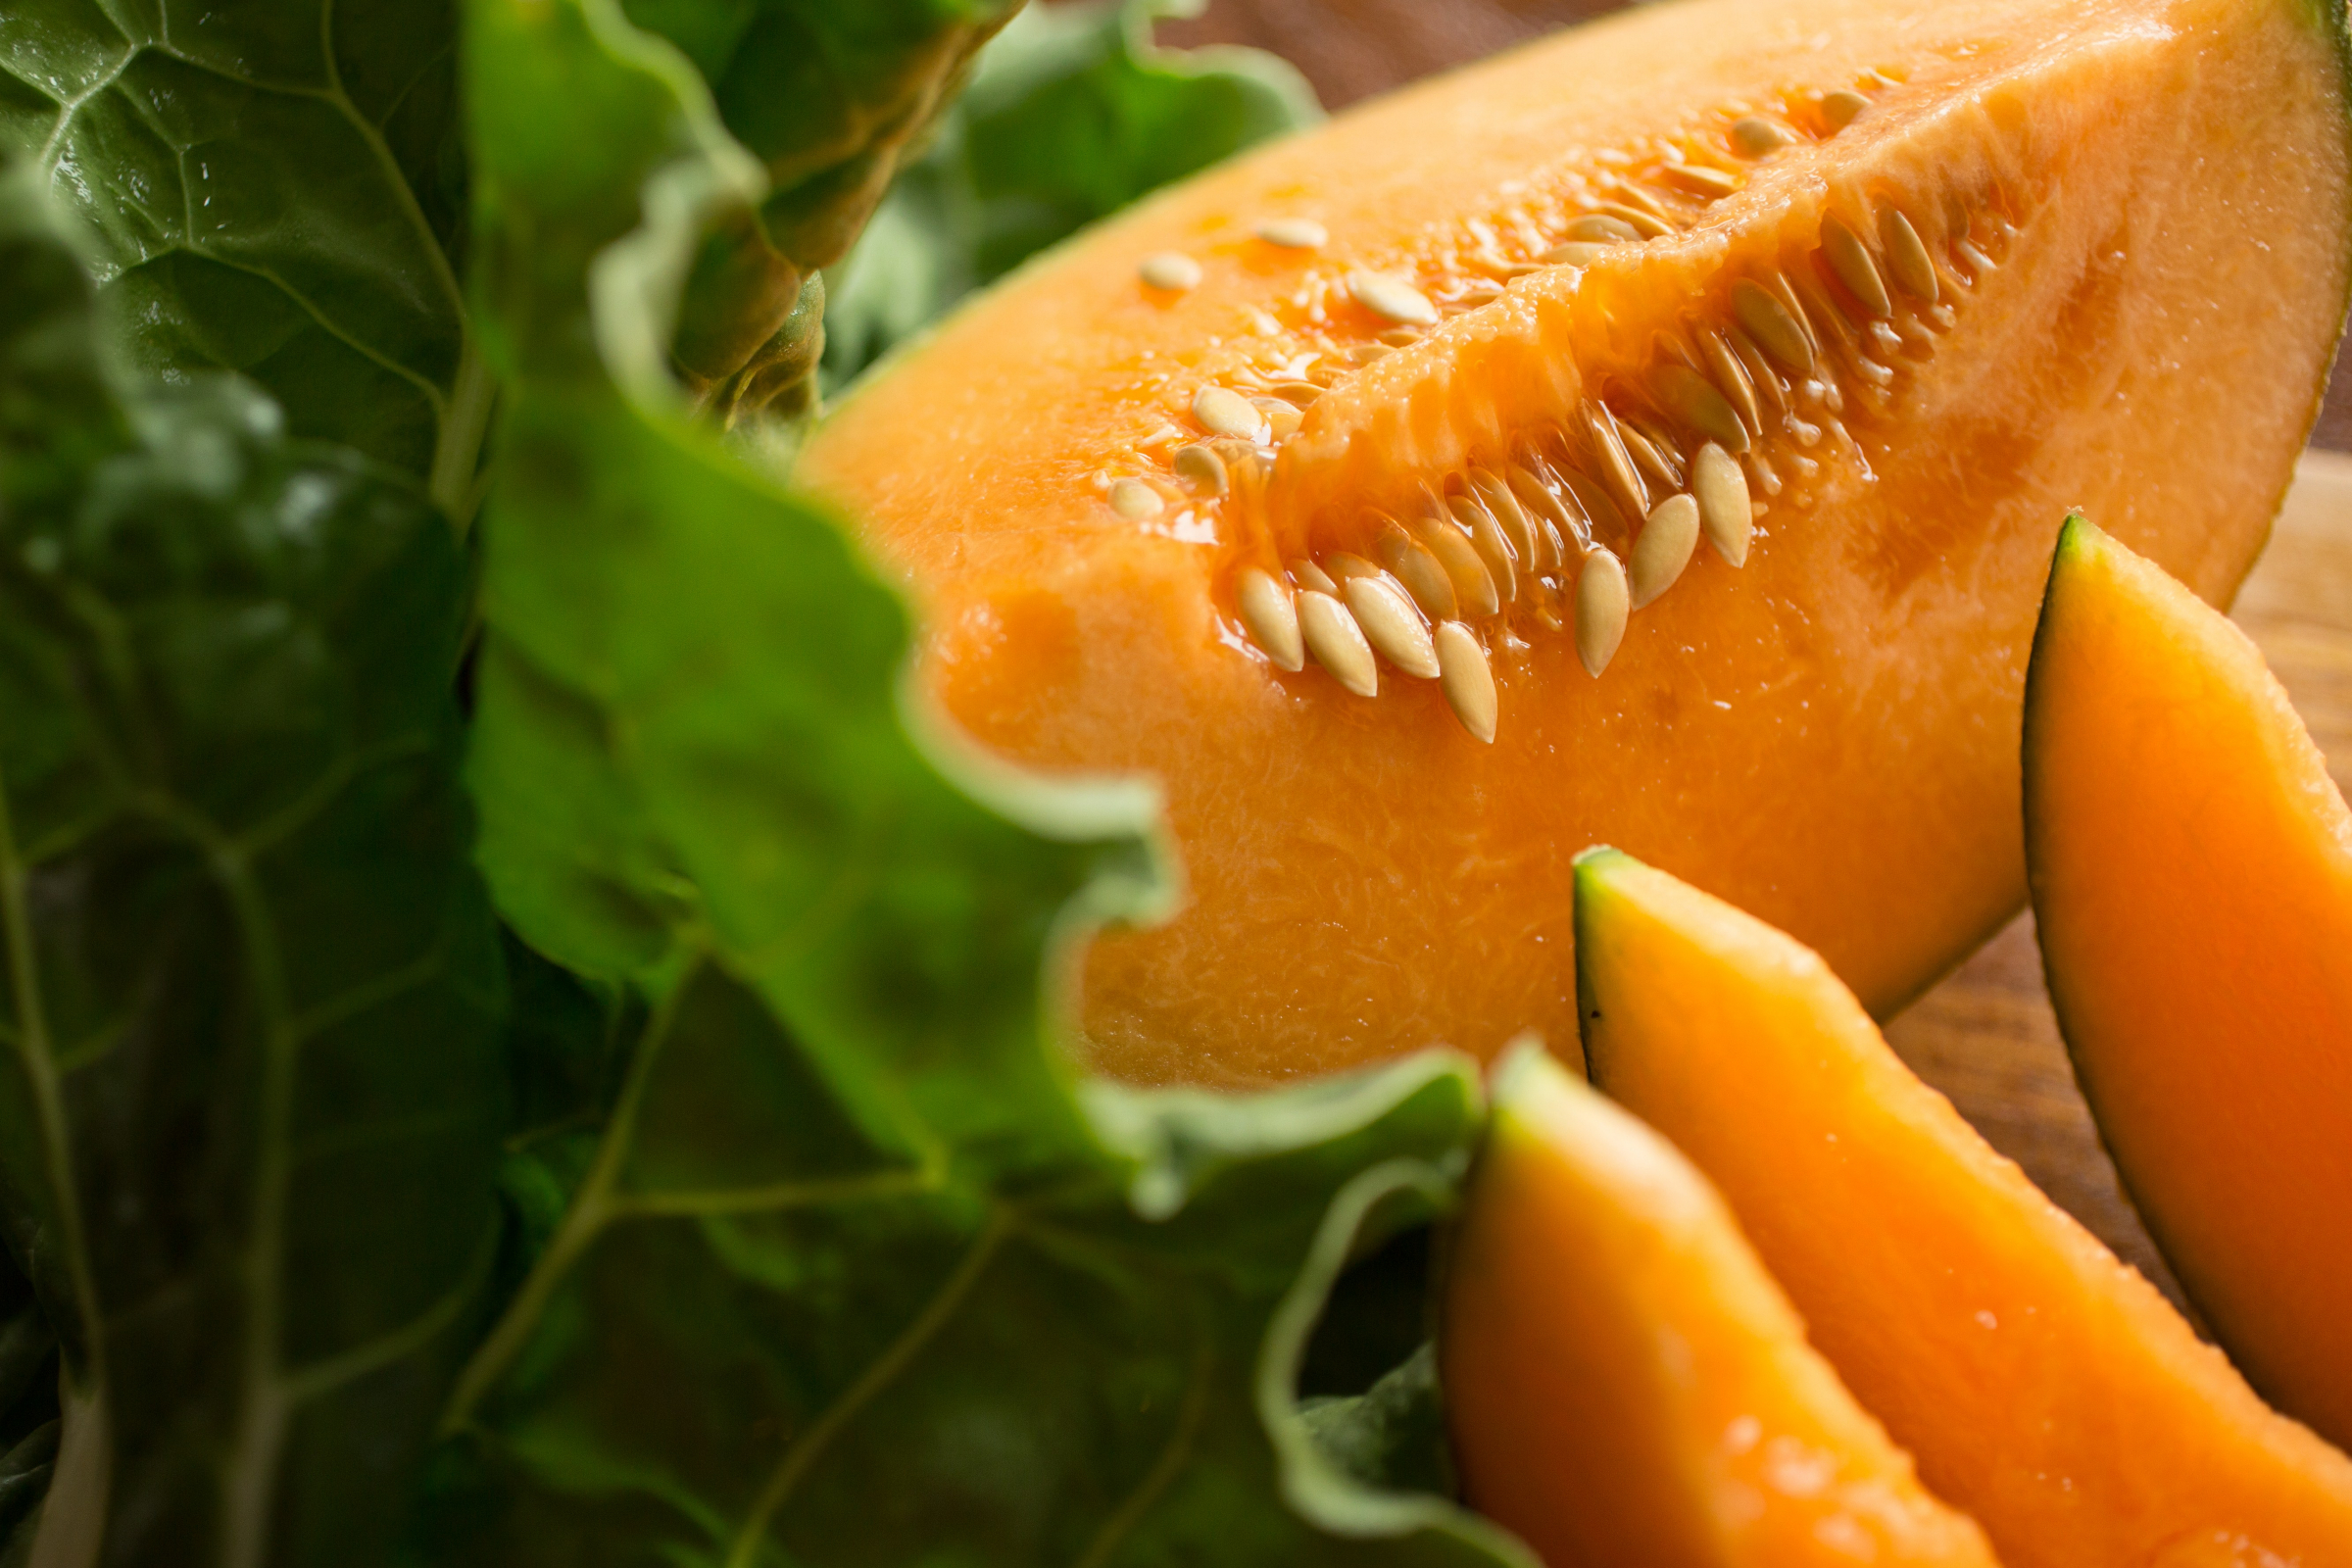 How to Choose the Best Cantaloupe